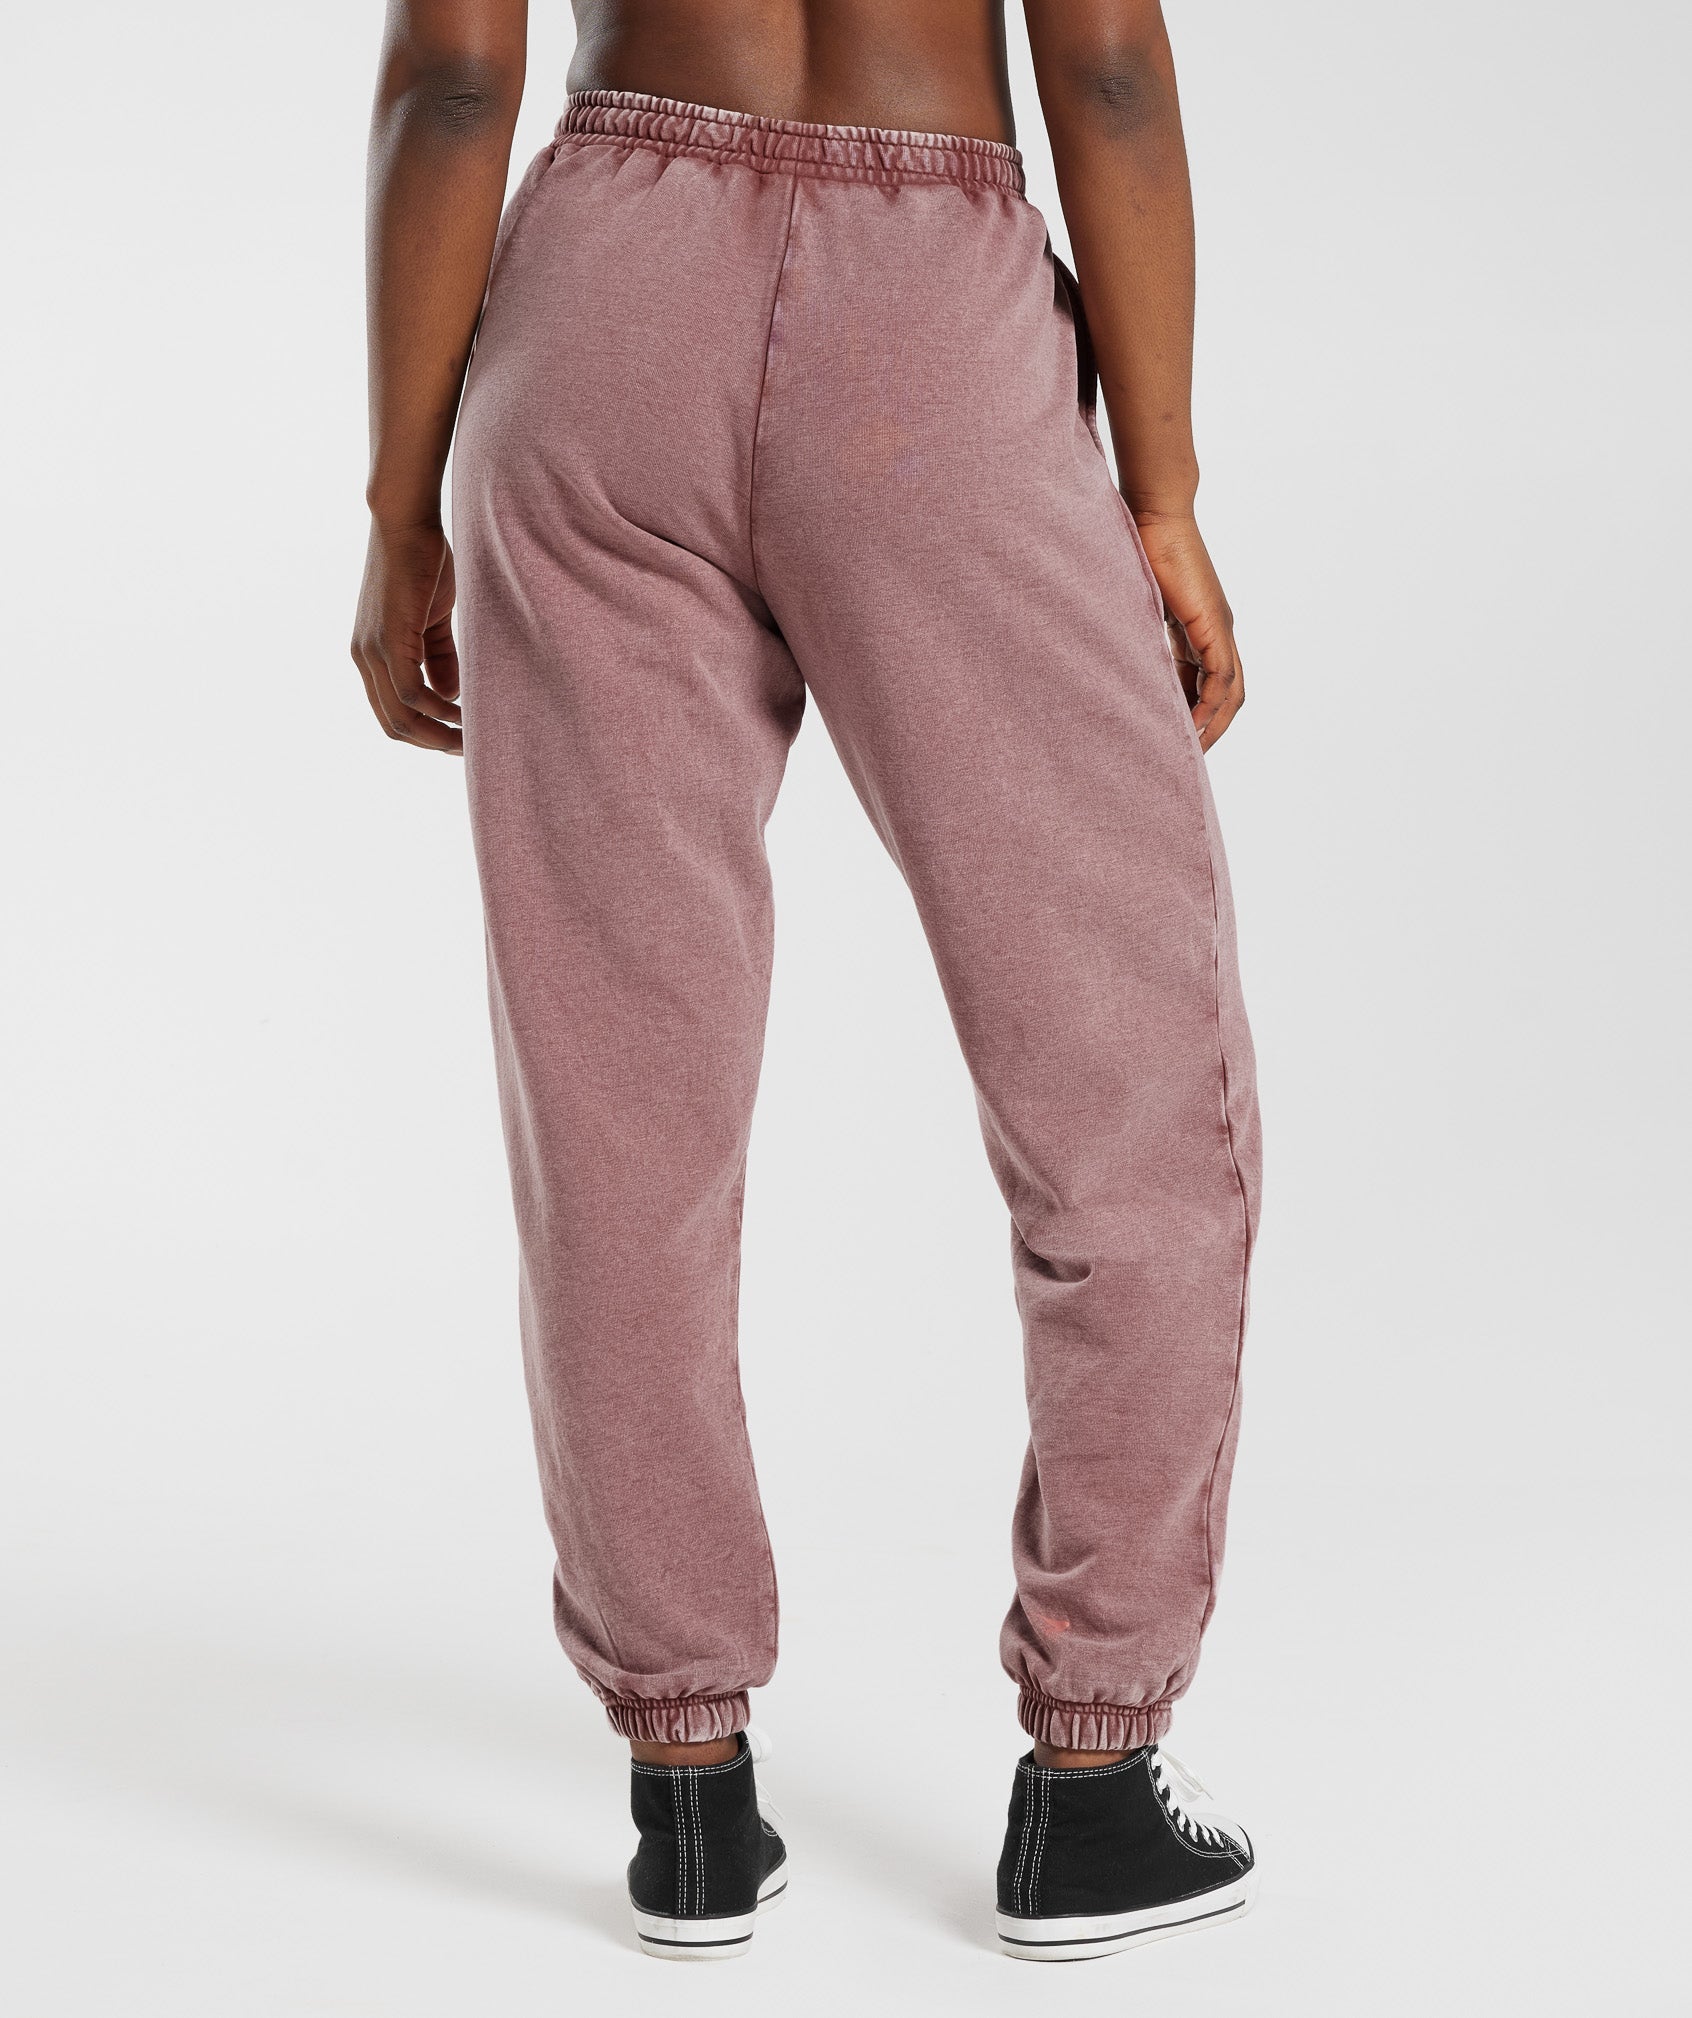 Collegiate Joggers in Dusty Maroon - view 2